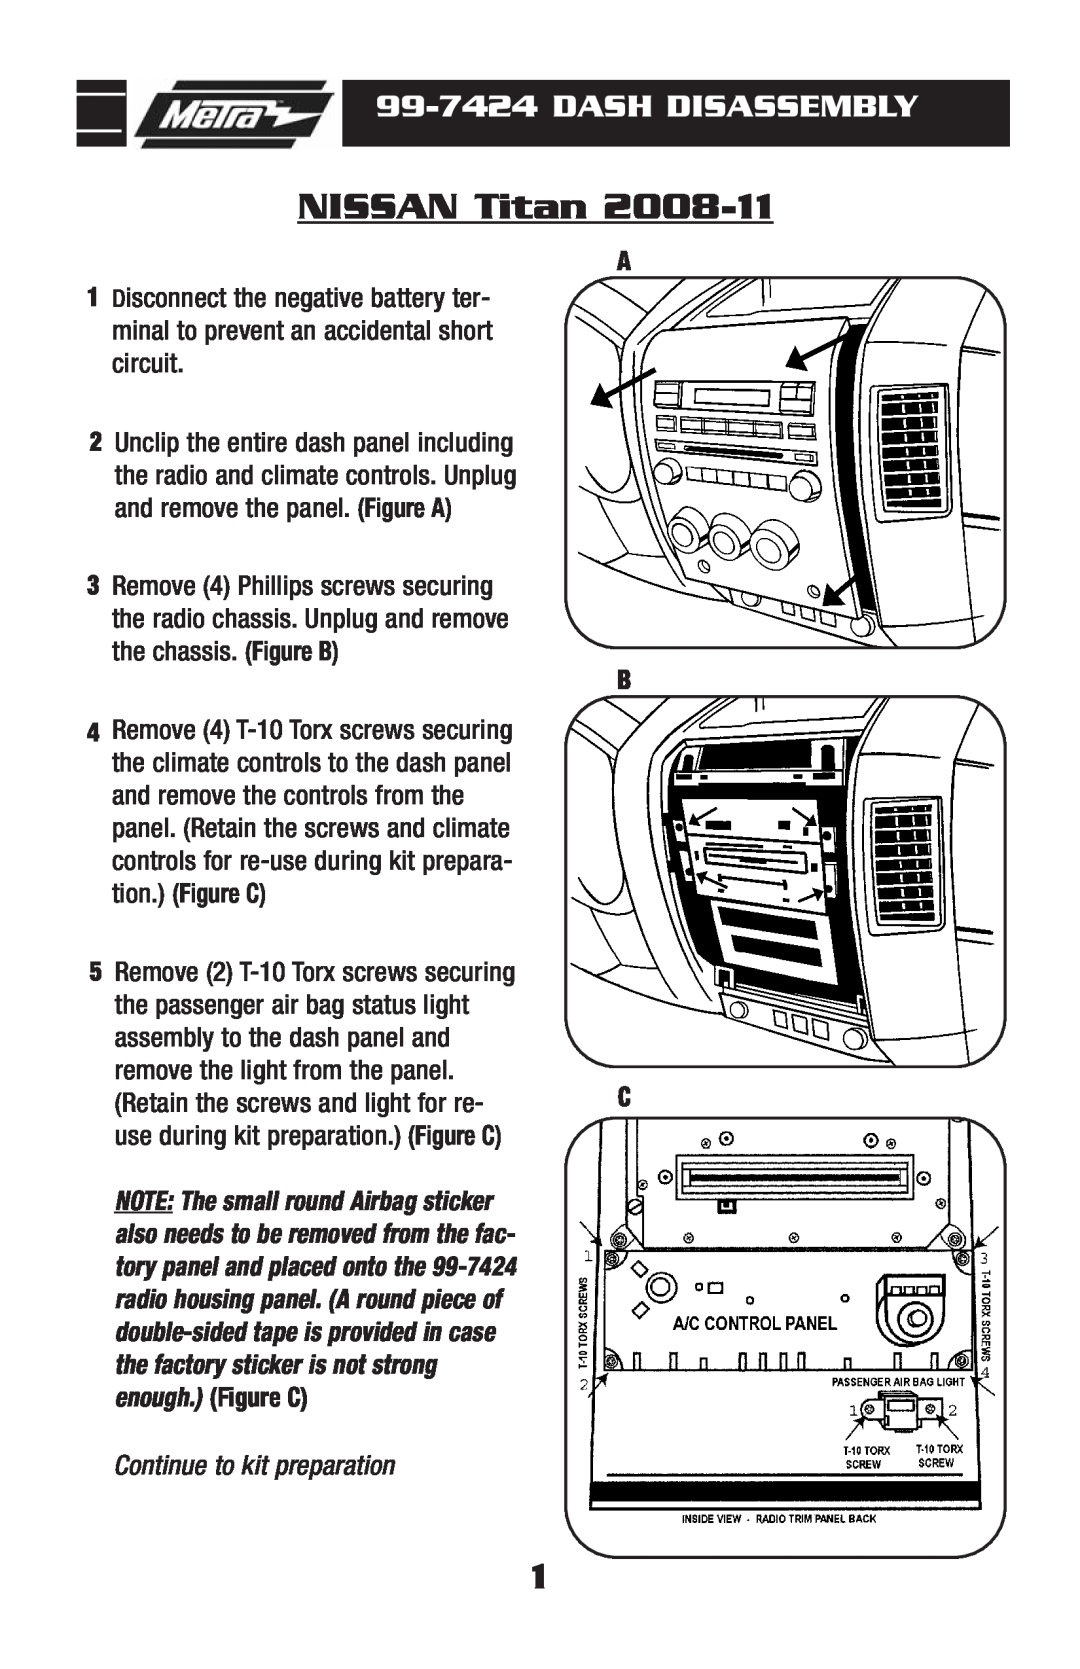 Metra Electronics 99-7424 installation instructions NISSAN Titan, Dash Disassembly, Continue to kit preparation 